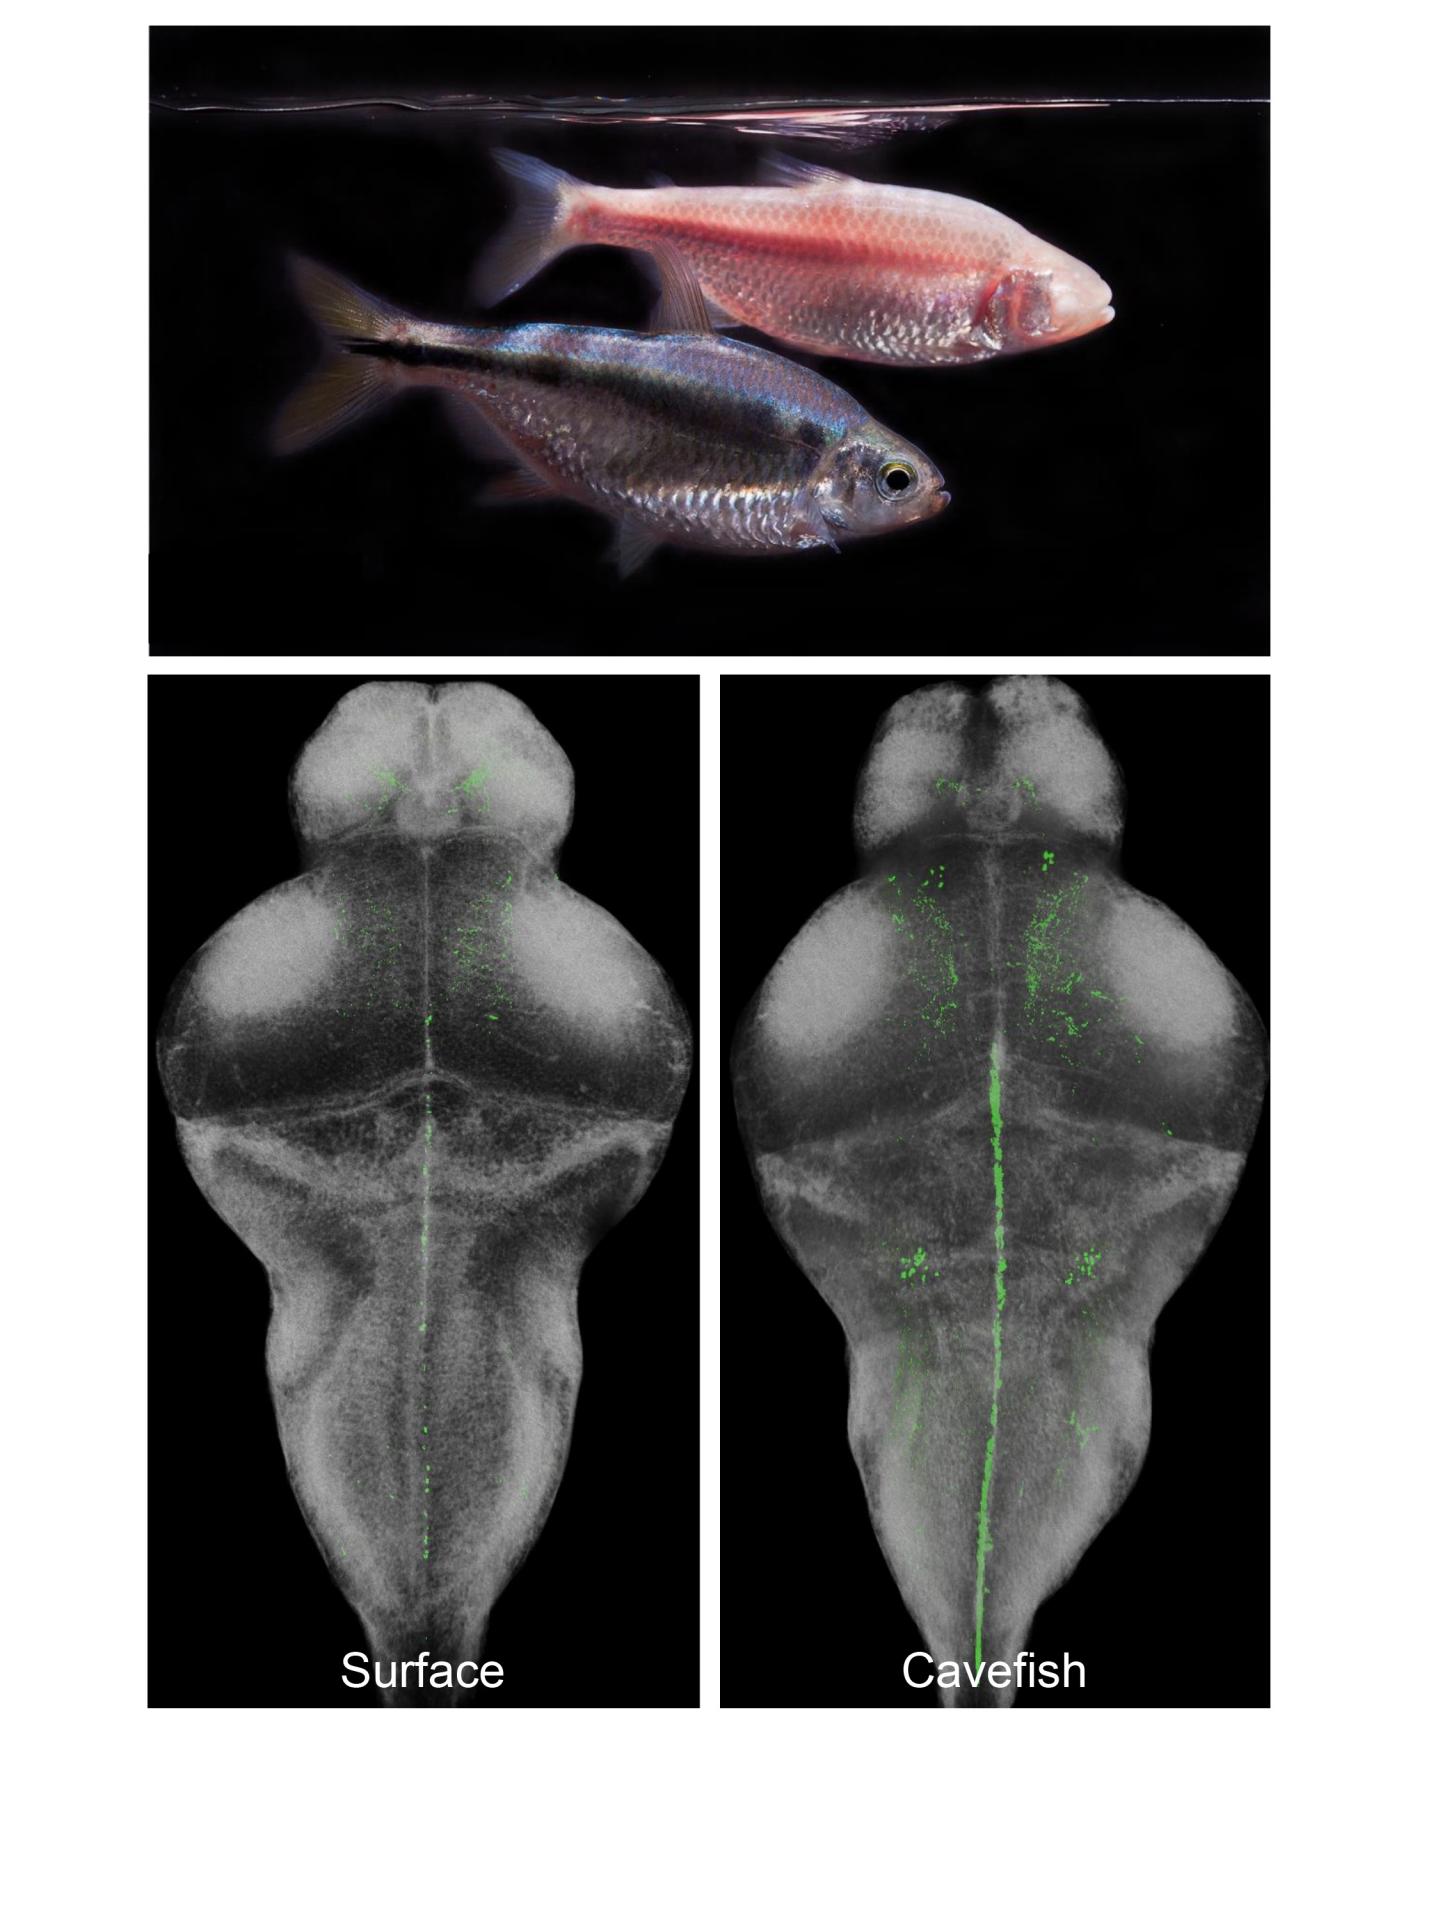 Hypocretin Signaling in Cavefish and Surface Fish